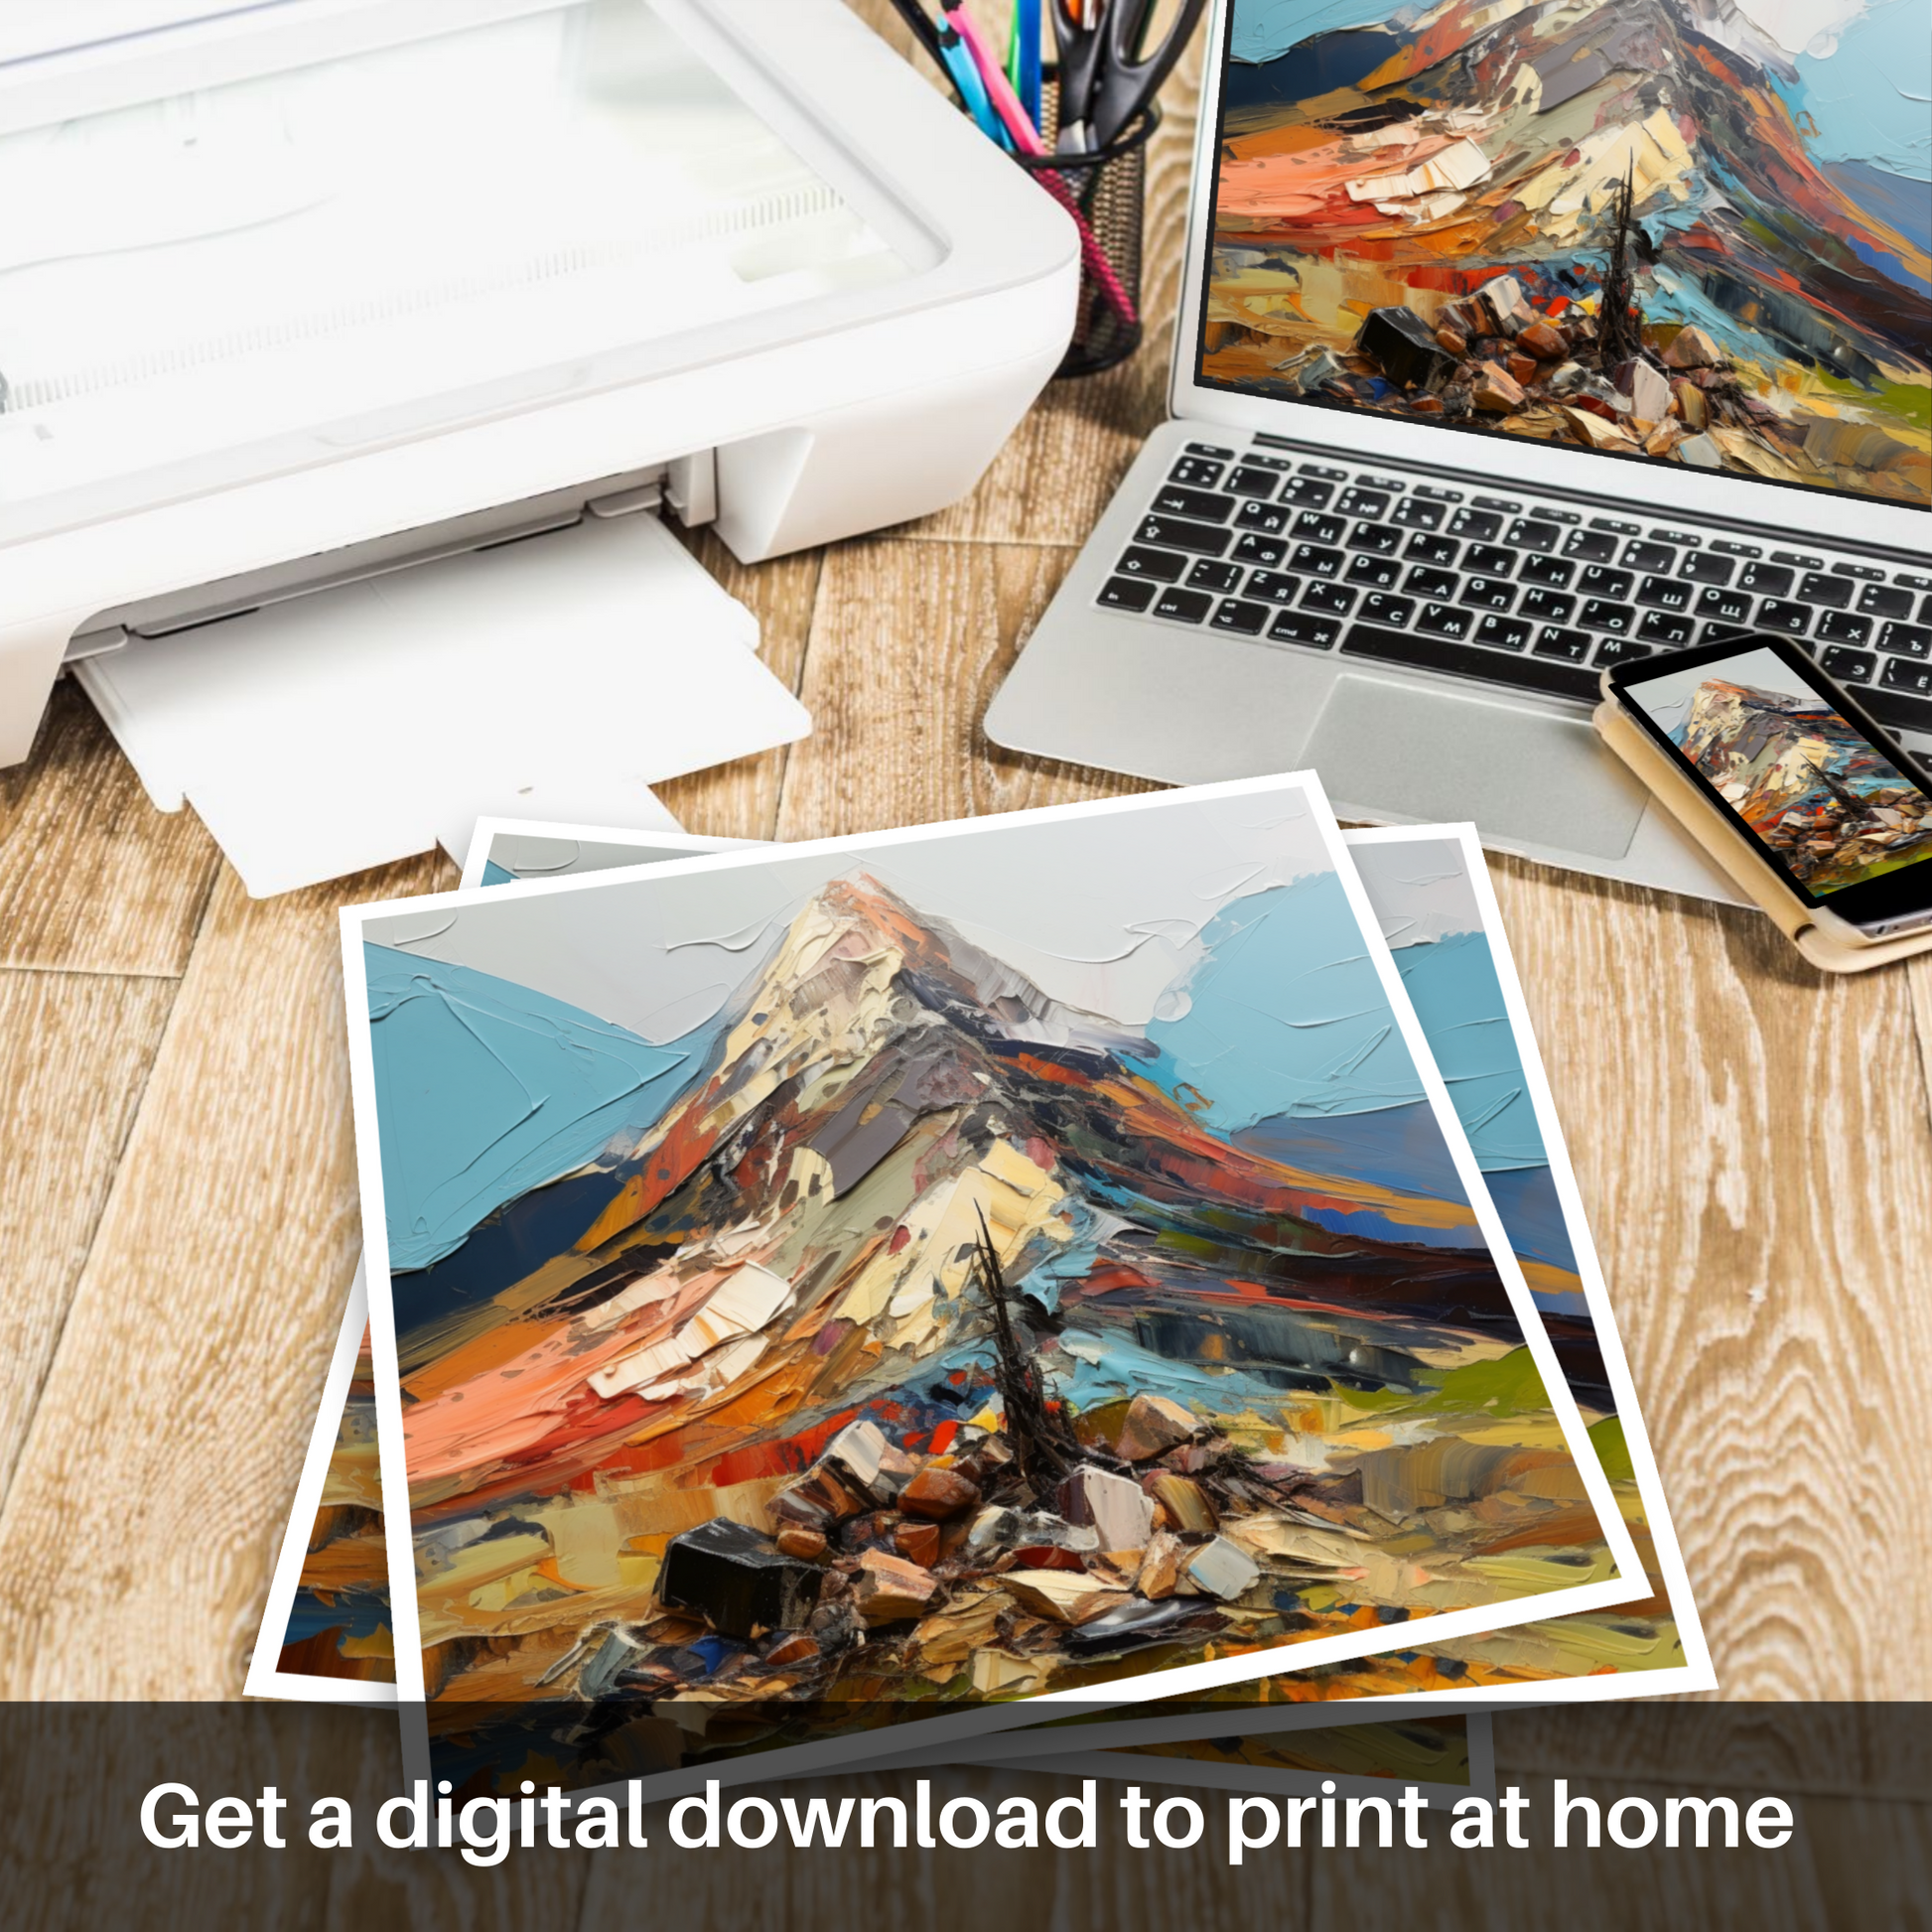 Downloadable and printable picture of Cairn Gorm, Highlands